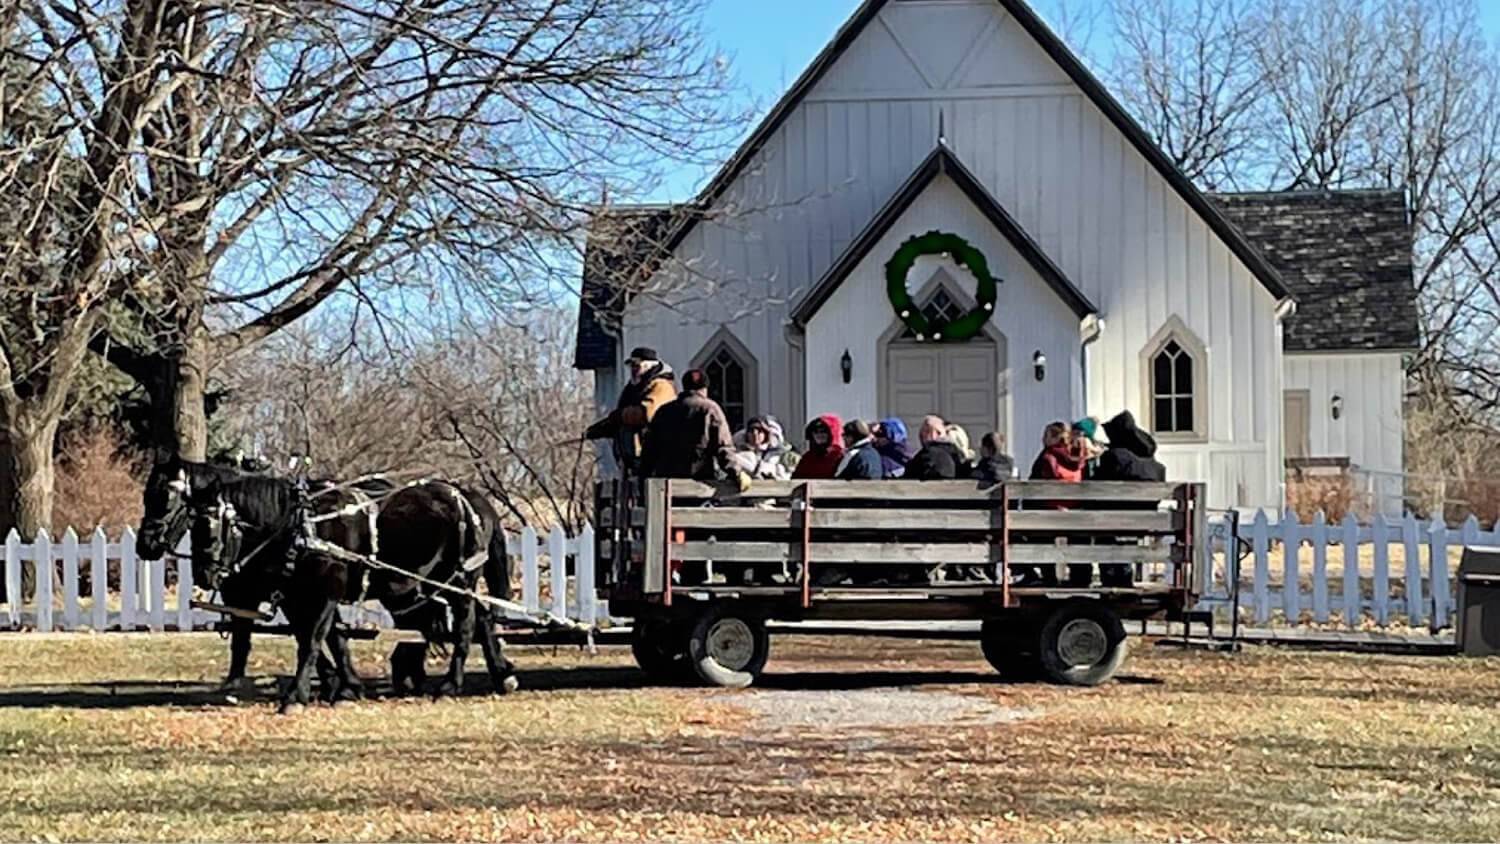 horse-drawn wagon in front of church decorated with wreath